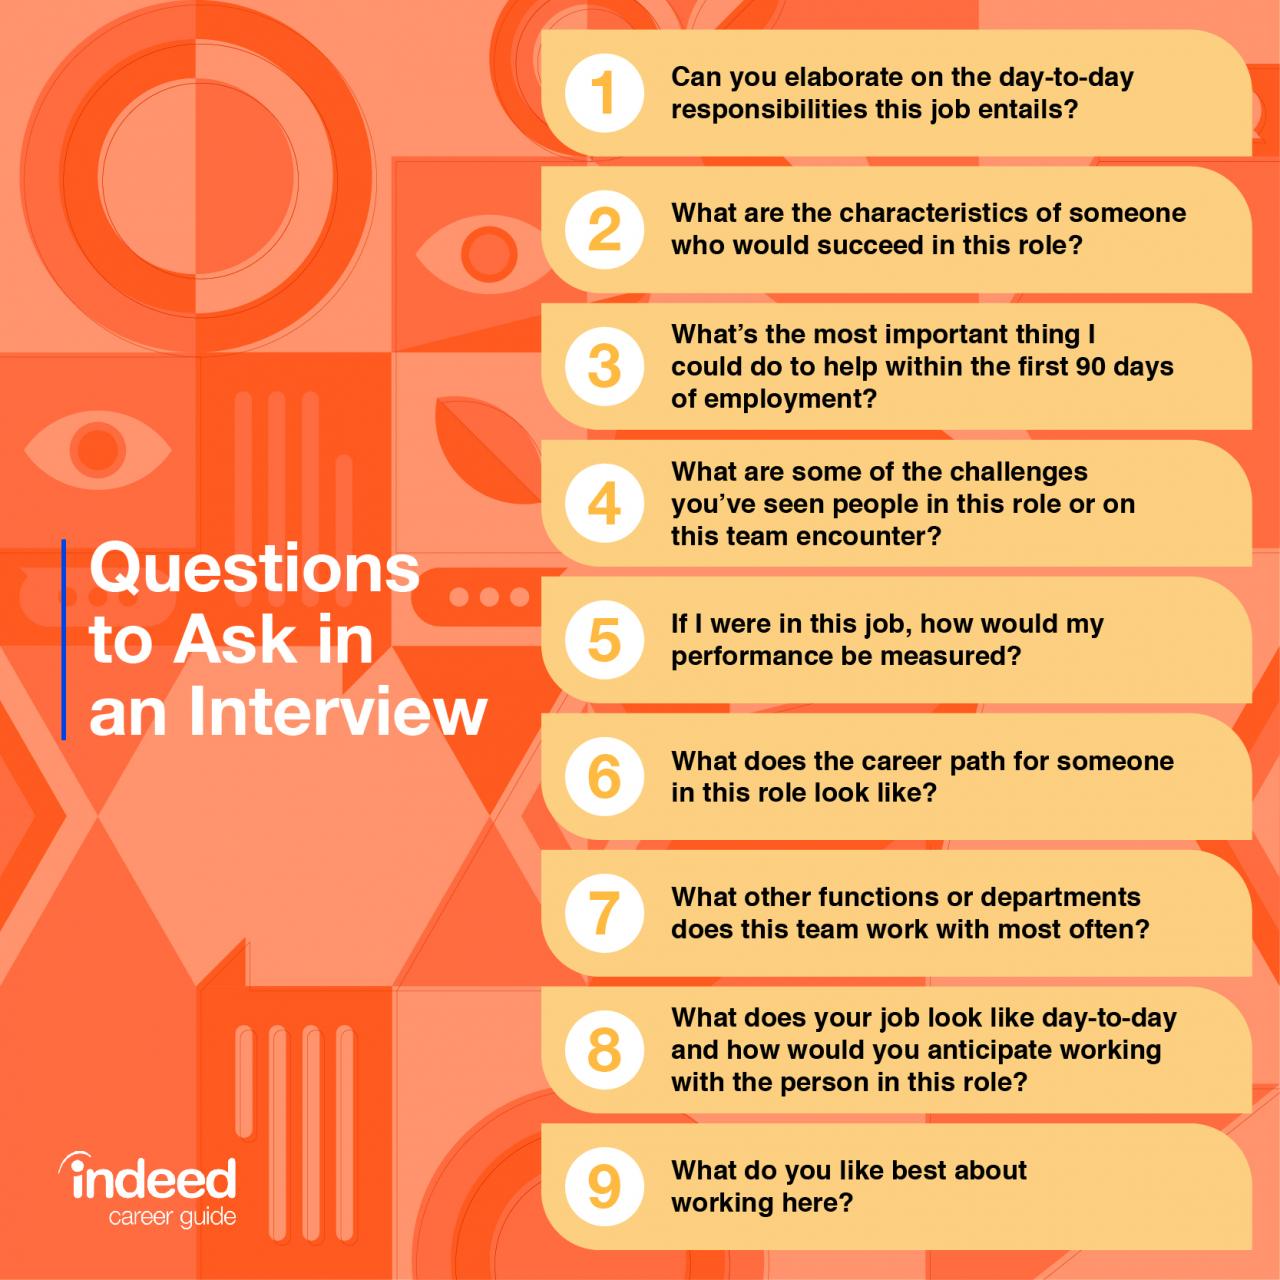 Good interview questions to ask as an interviewer